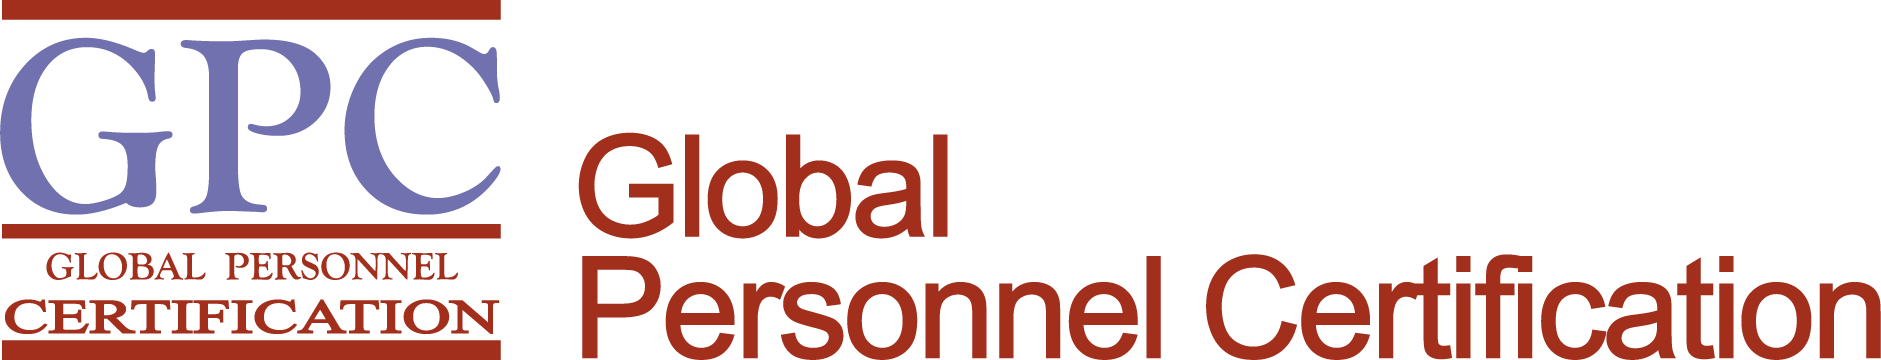 GPC Global Personnel Certification